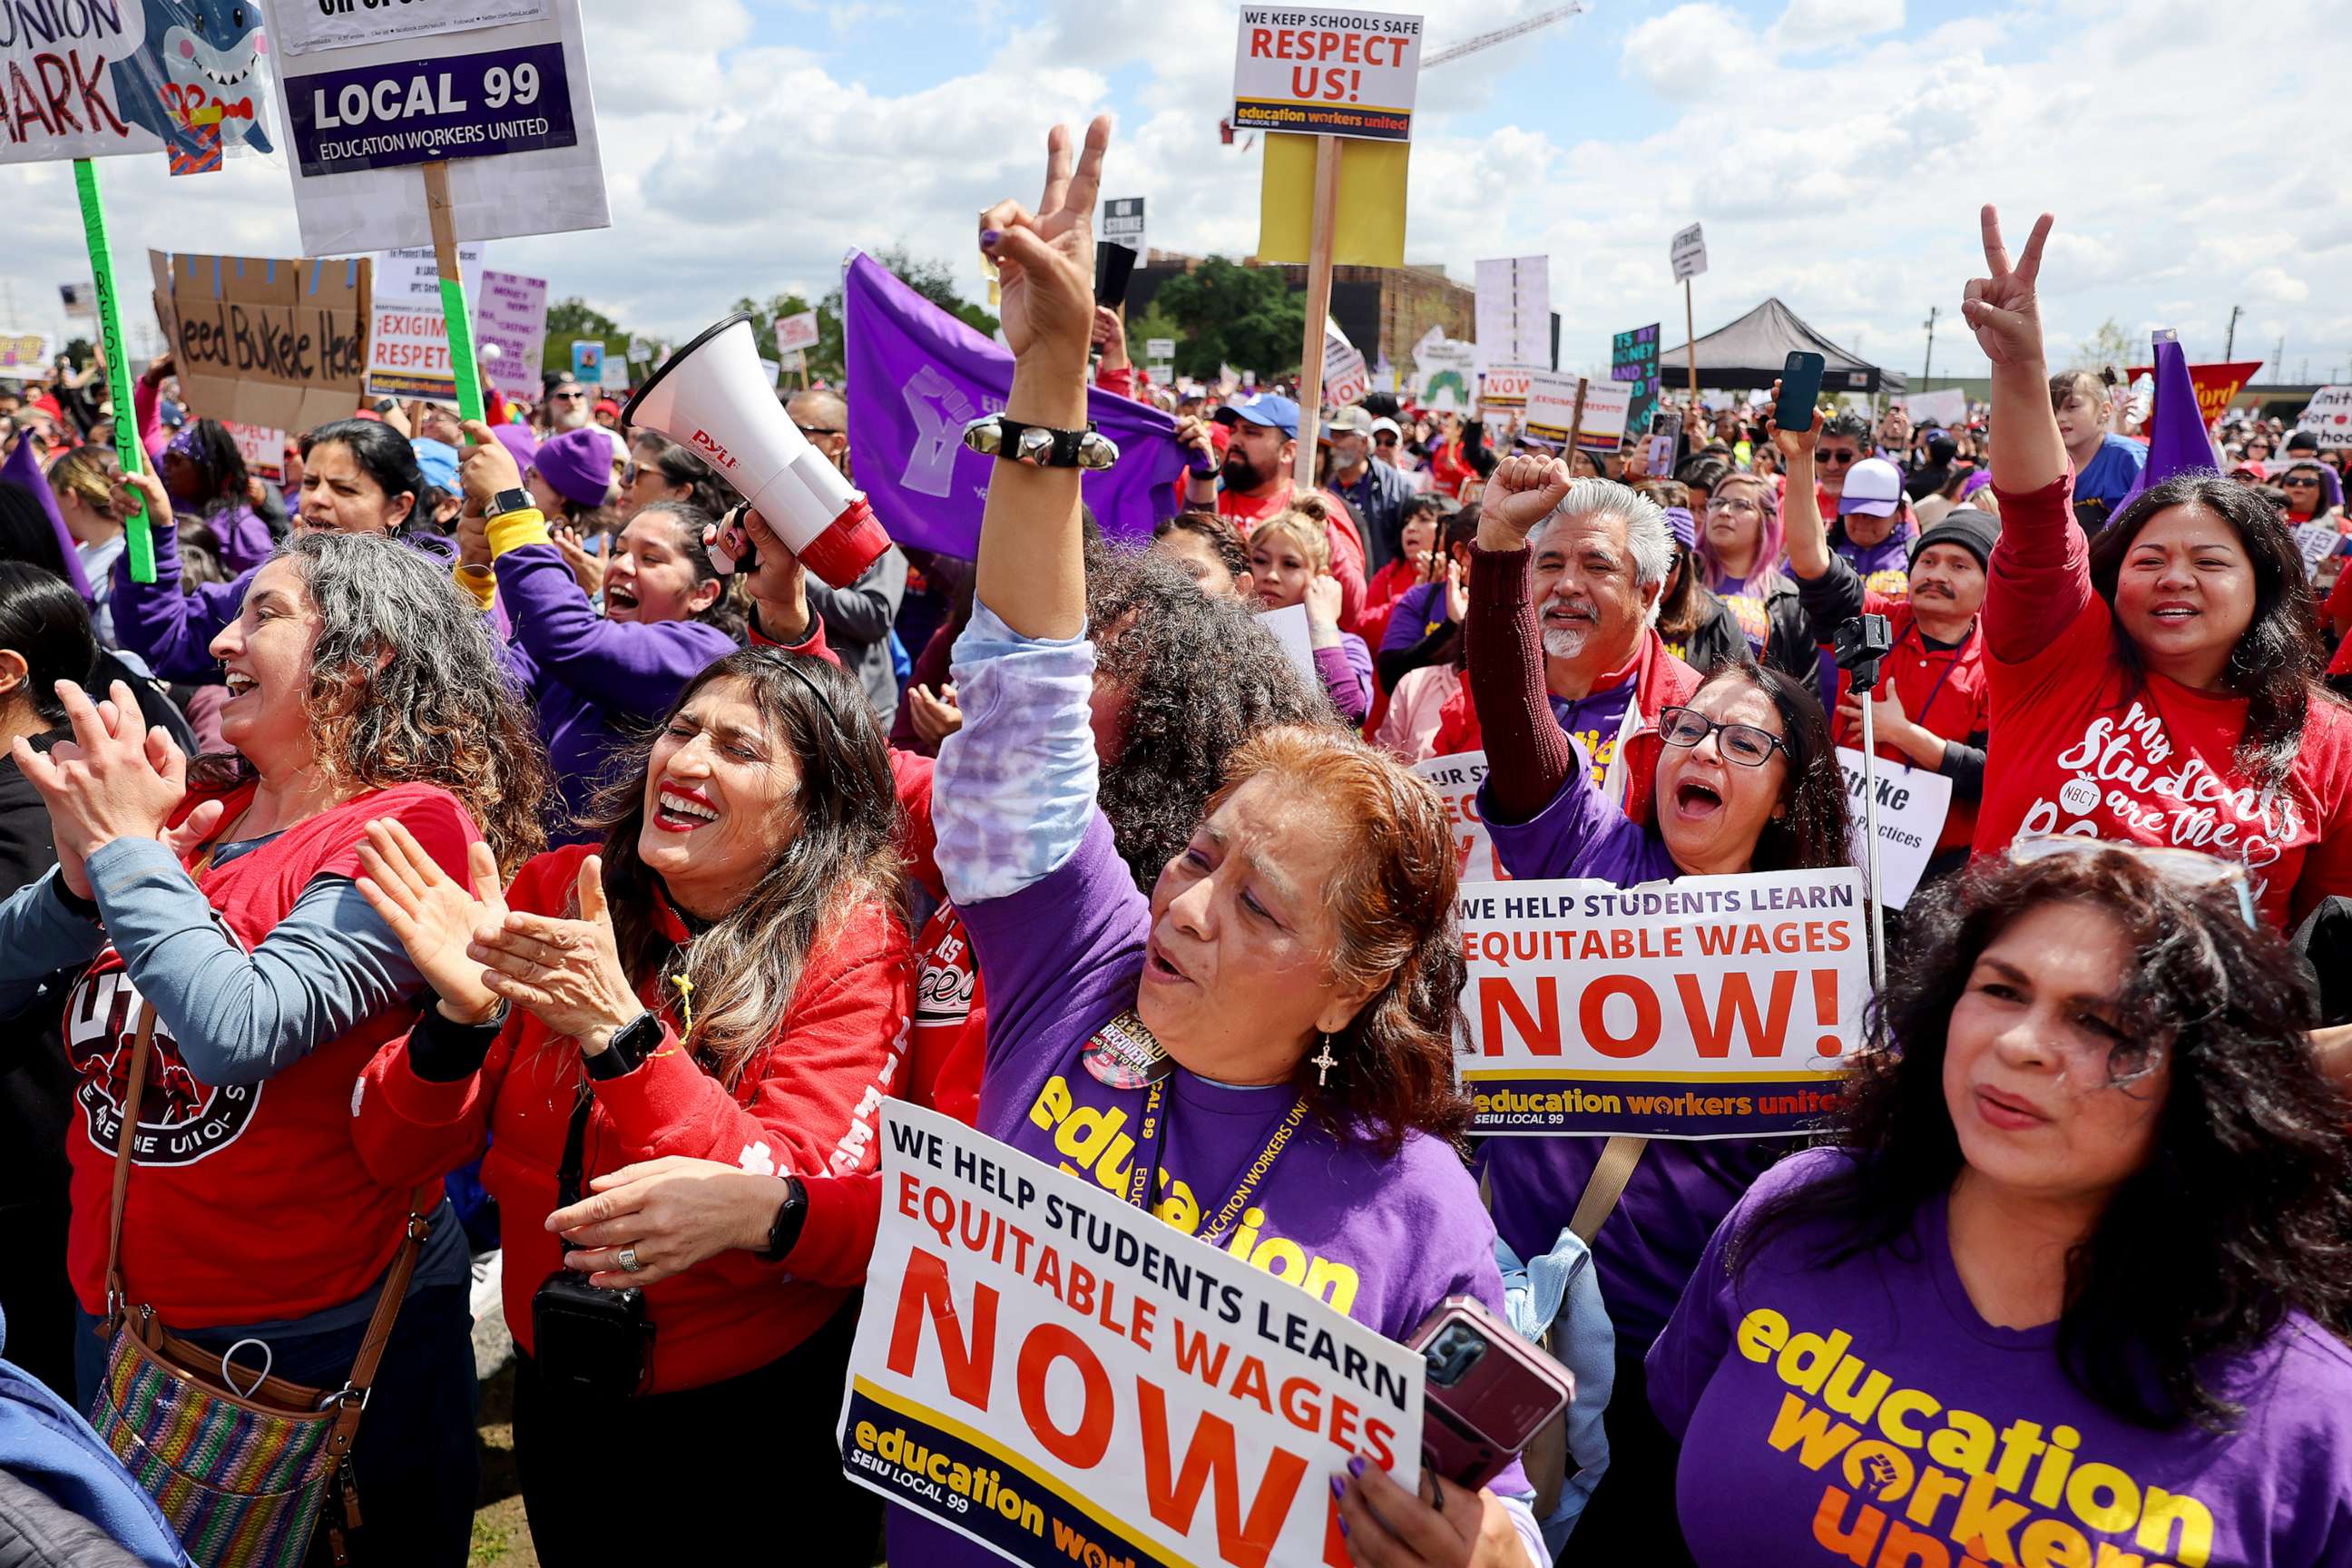 PHOTO: Los Angeles Unified School District (LAUSD) workers and supporters rally in Los Angeles State Historic Park on the last day of a strike over a new contract, March 23, 2023, in Los Angeles.